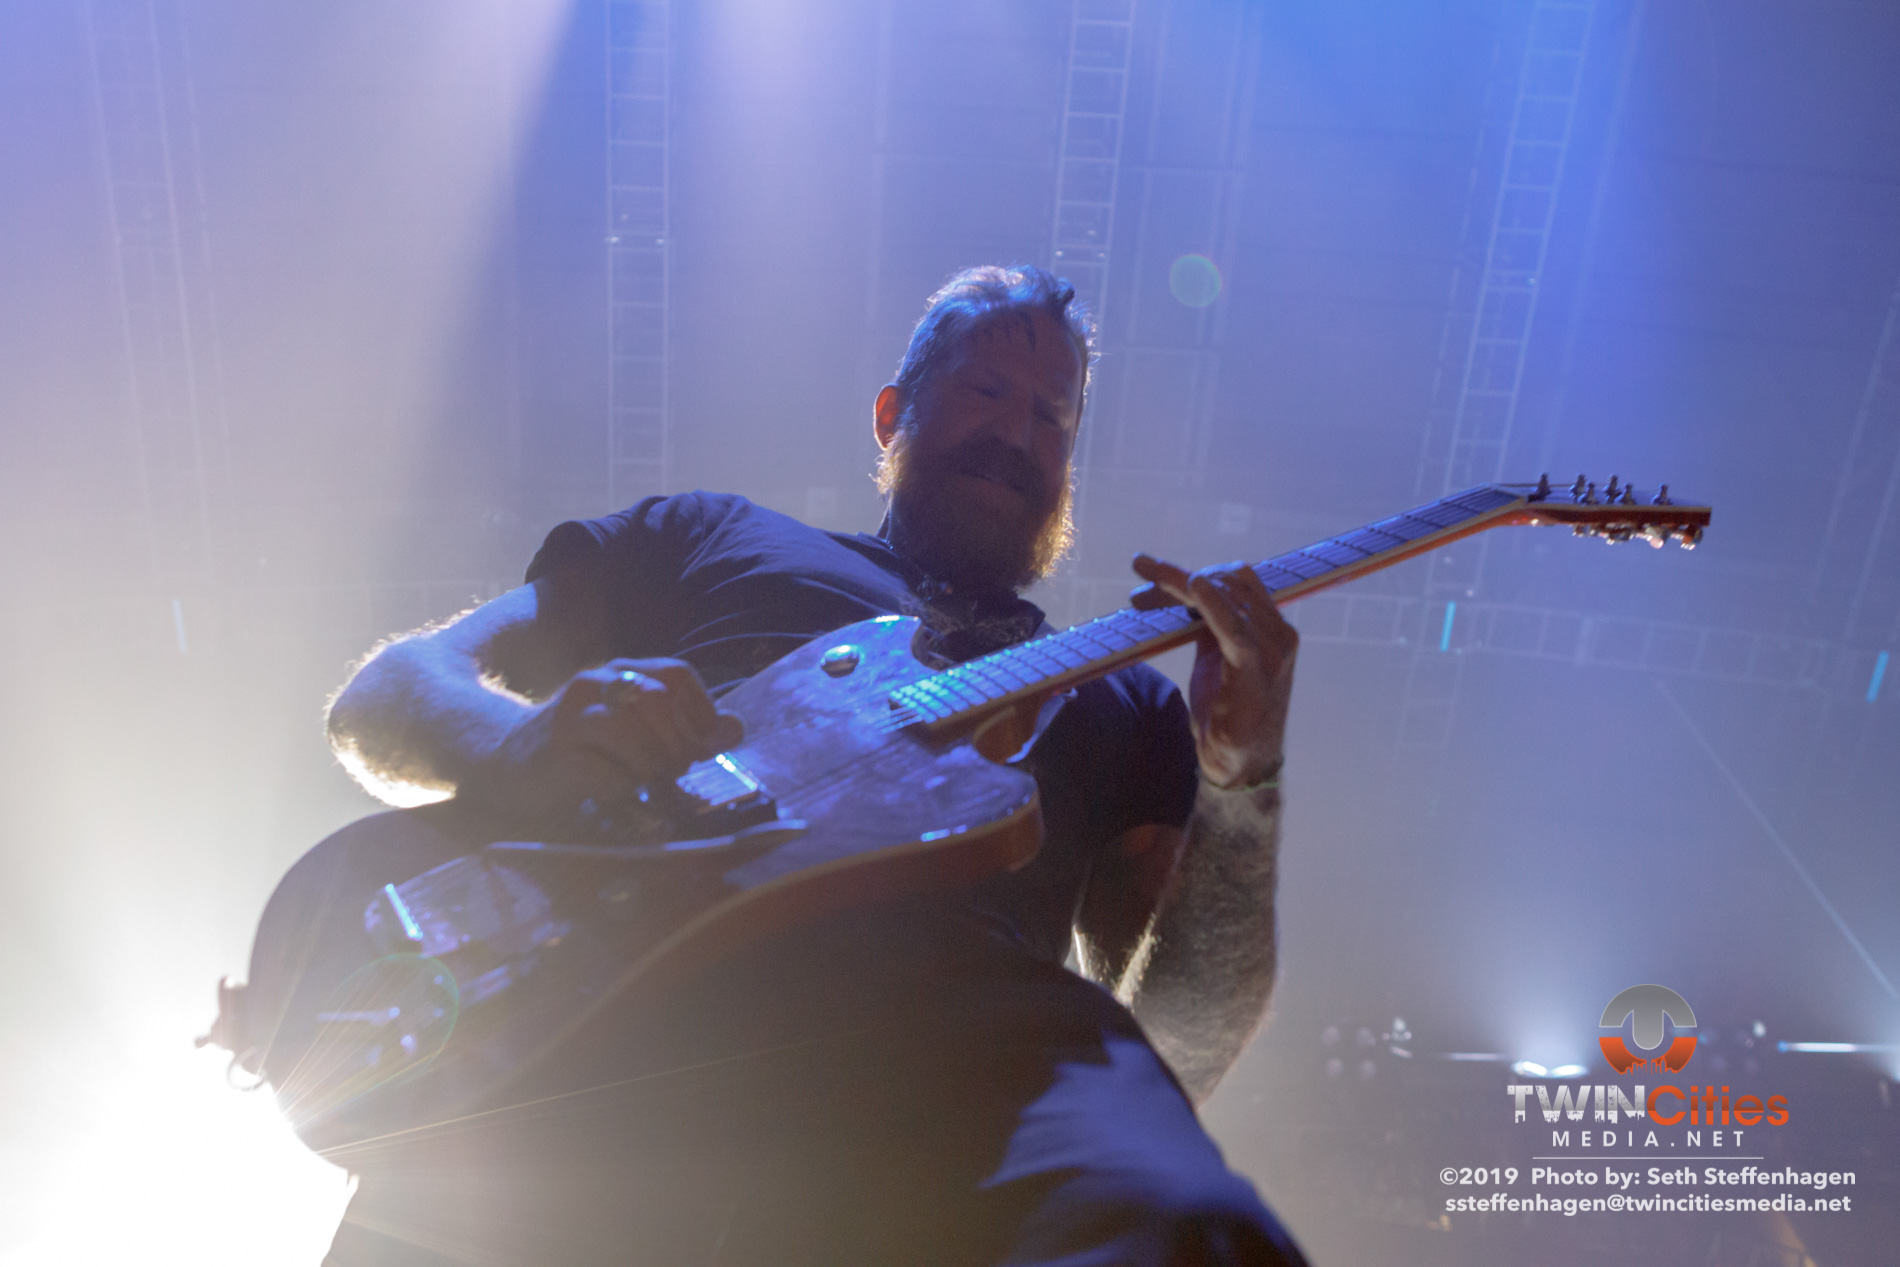 June 15, 2019 - Minneapolis, Minnesota, United States - Mastodon live in concert at The Armory along with Coheed & Cambria and Every Time I Die.

(Photo by Seth Steffenhagen/Steffenhagen Photography)